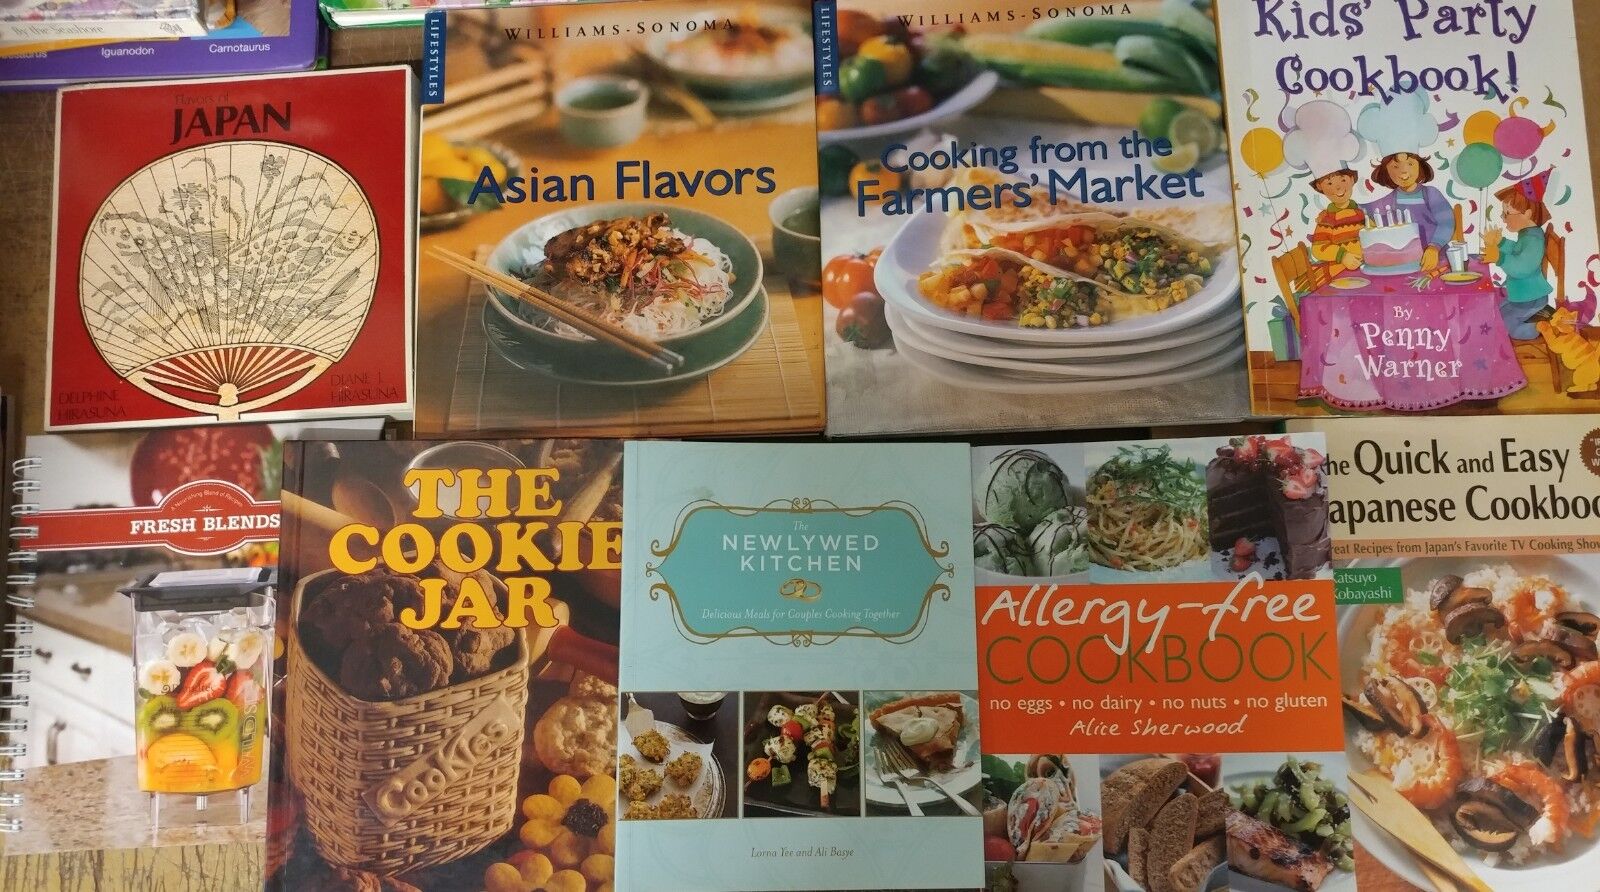 Lot of 20 Cooking Baking Recipe Grilling Low-Fat Ingredient Books MIX-UNSORTED Без бренда - фотография #7